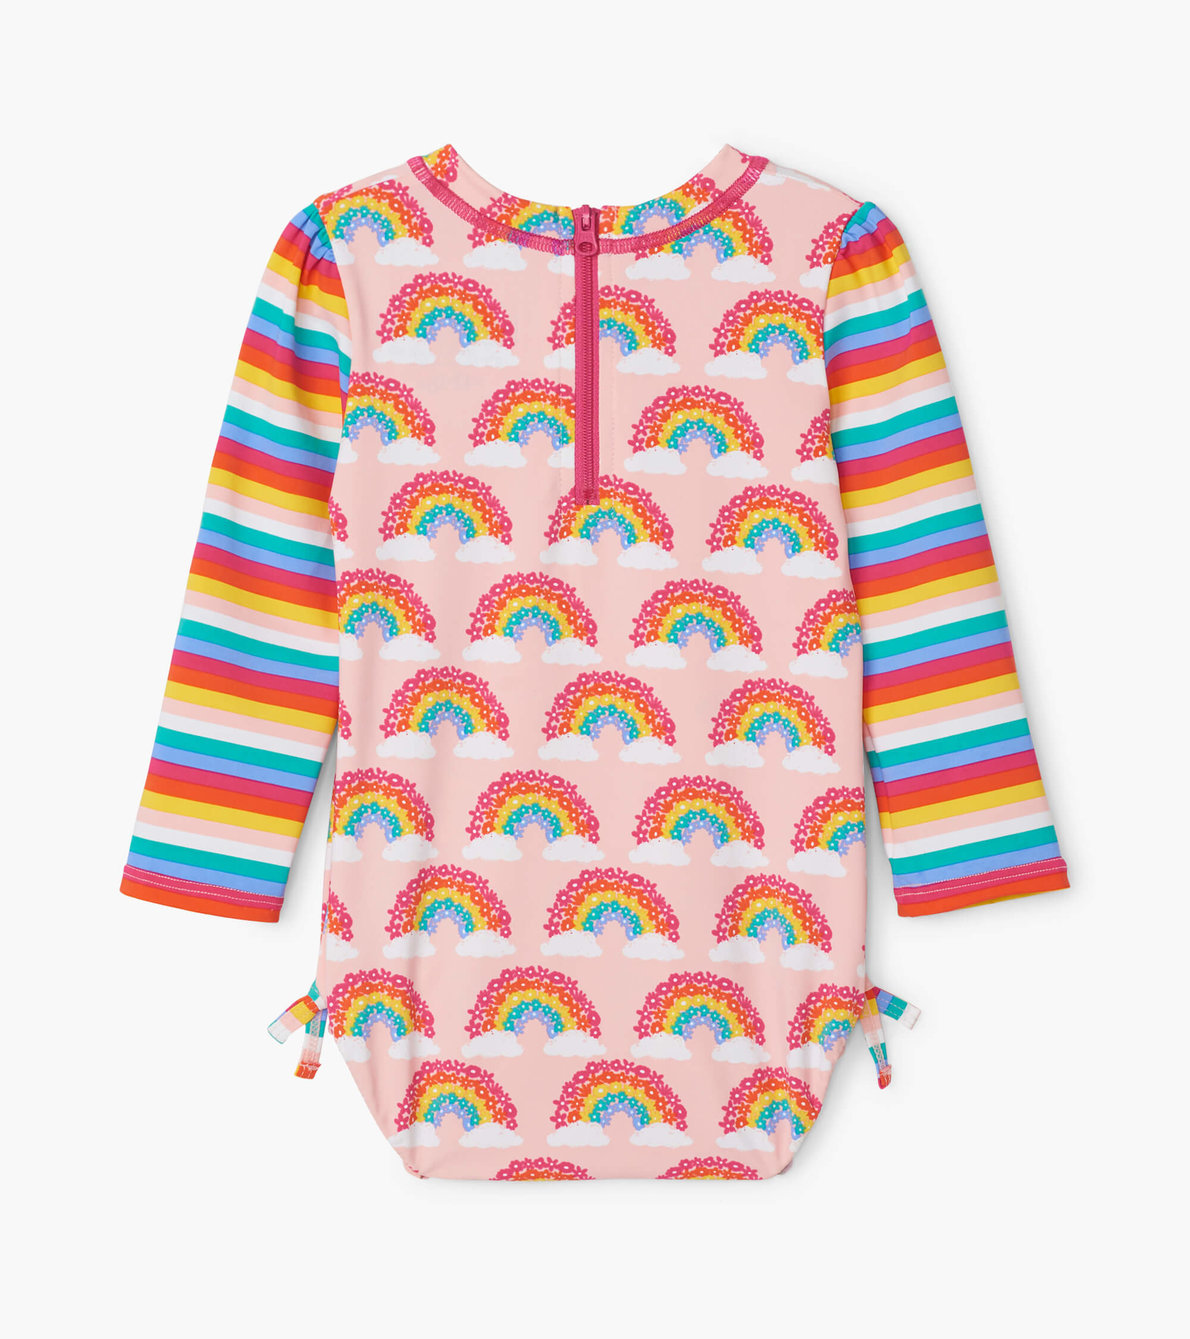 View larger image of Magical Rainbows Baby Rashguard Swimsuit